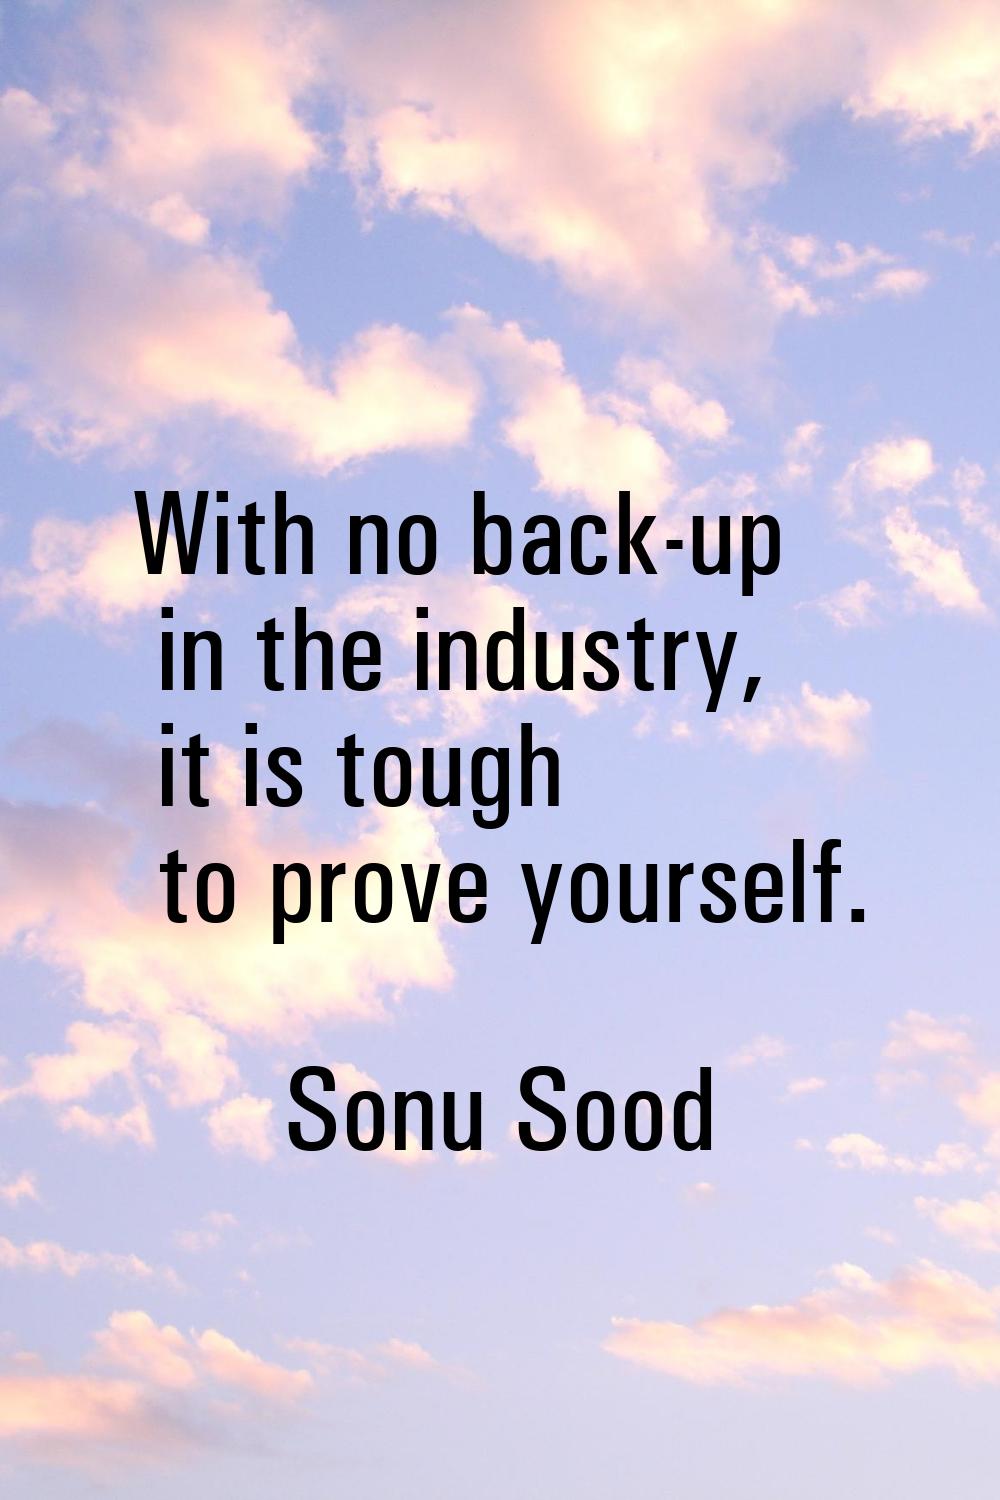 With no back-up in the industry, it is tough to prove yourself.